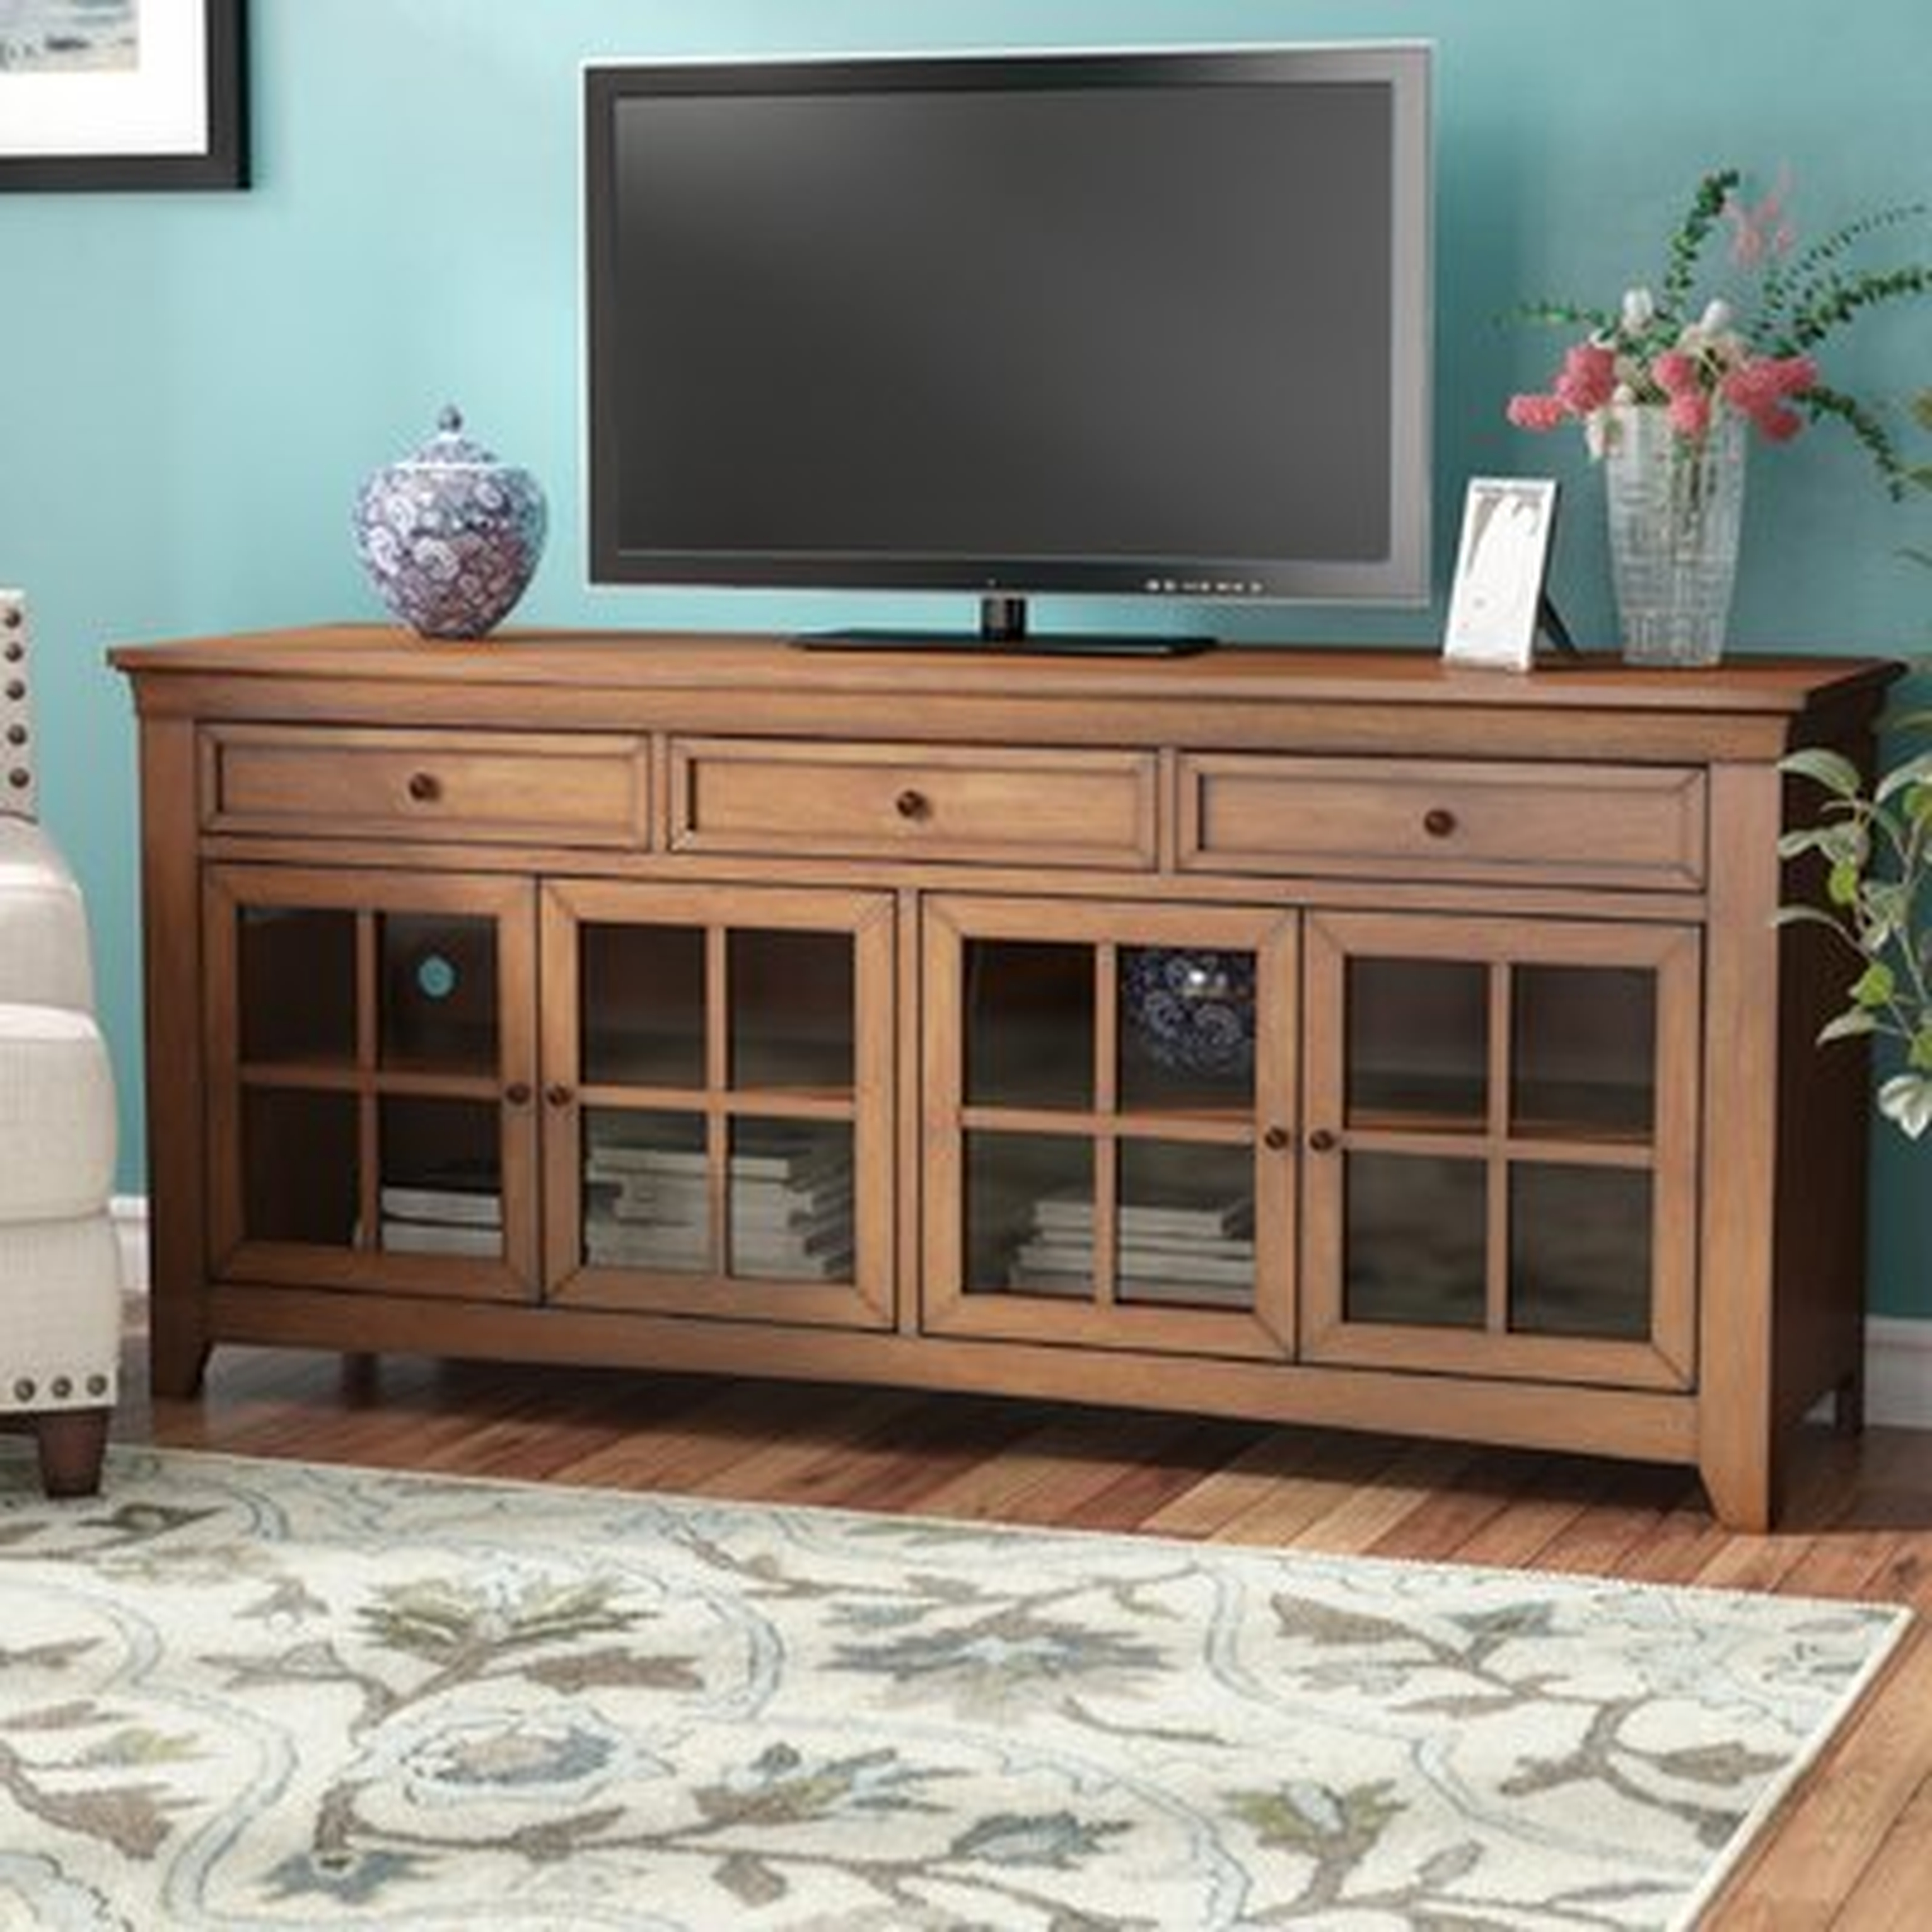 Nido TV Stand for TVs up to 78 inches - Birch Lane